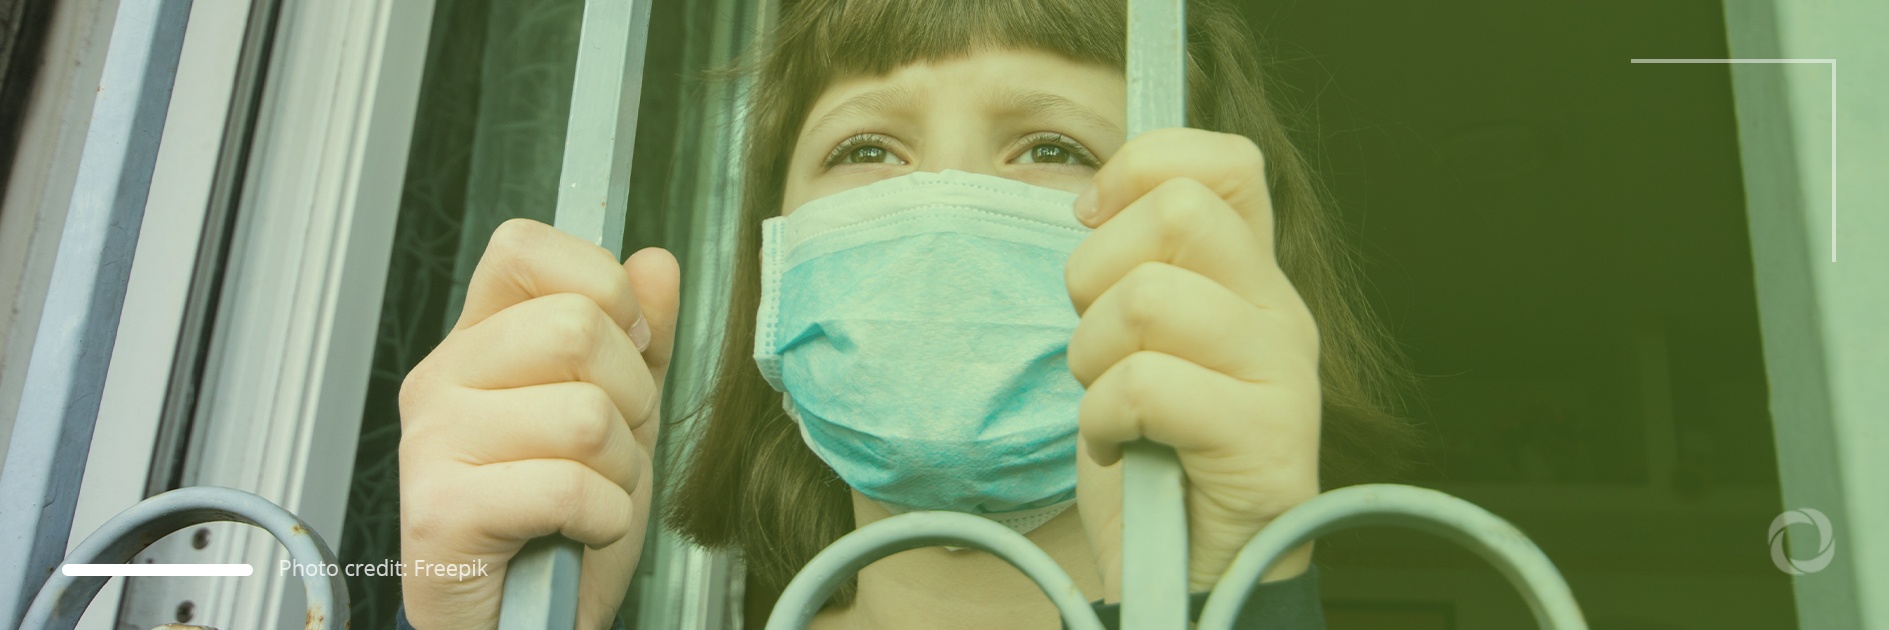 Pandemic threatens to deteriorate well-being of children globally